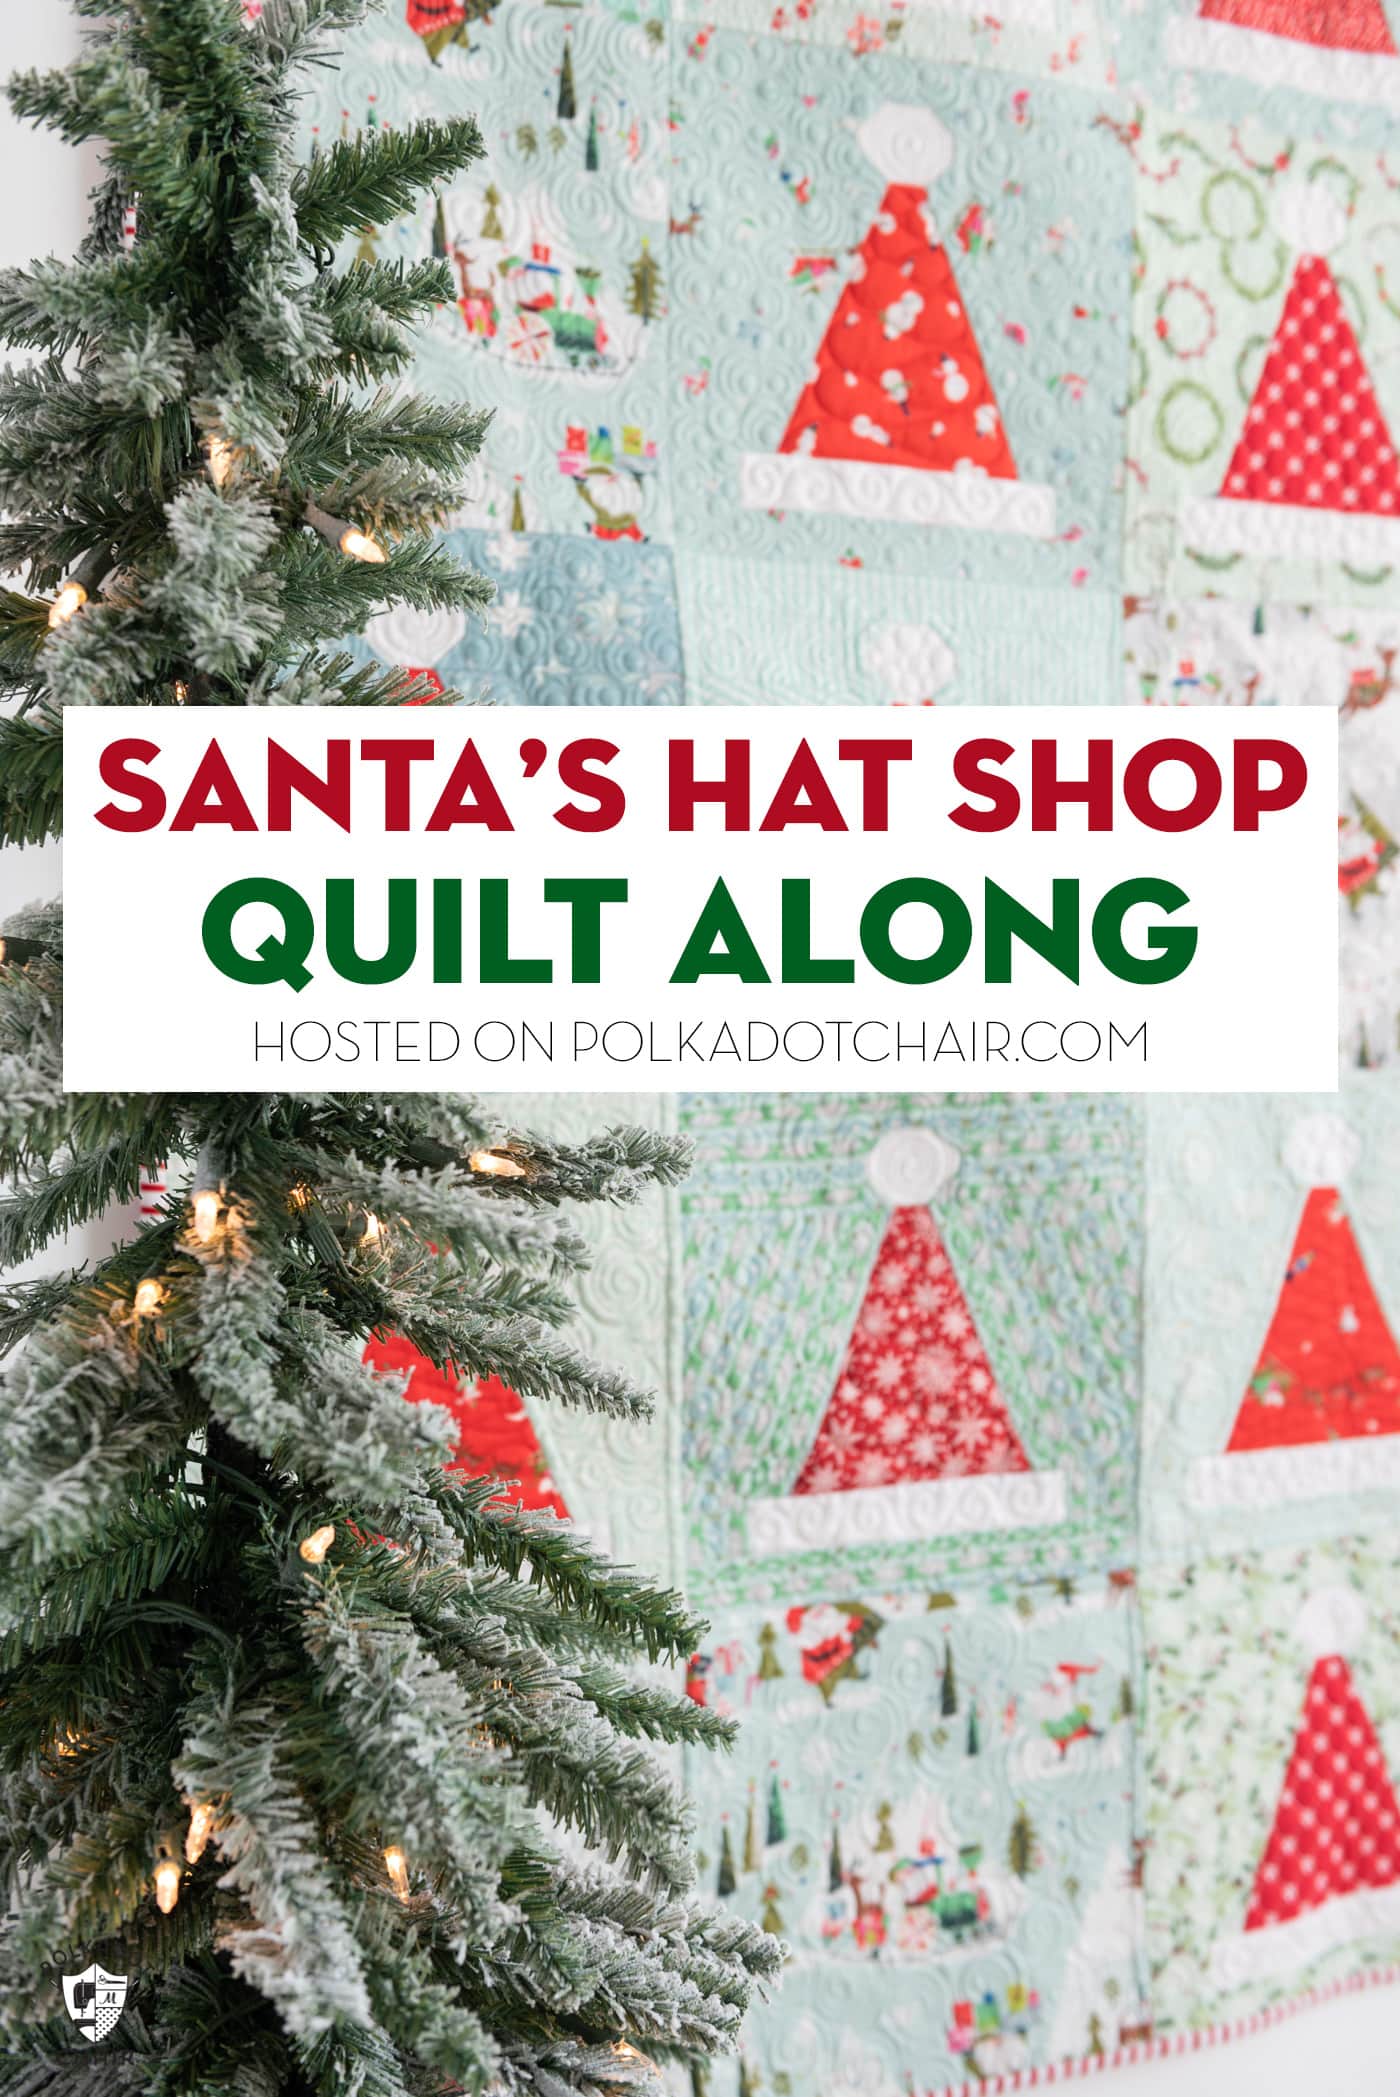 Please join us for the Santa’s Hat Shop Christmas Quilt Along